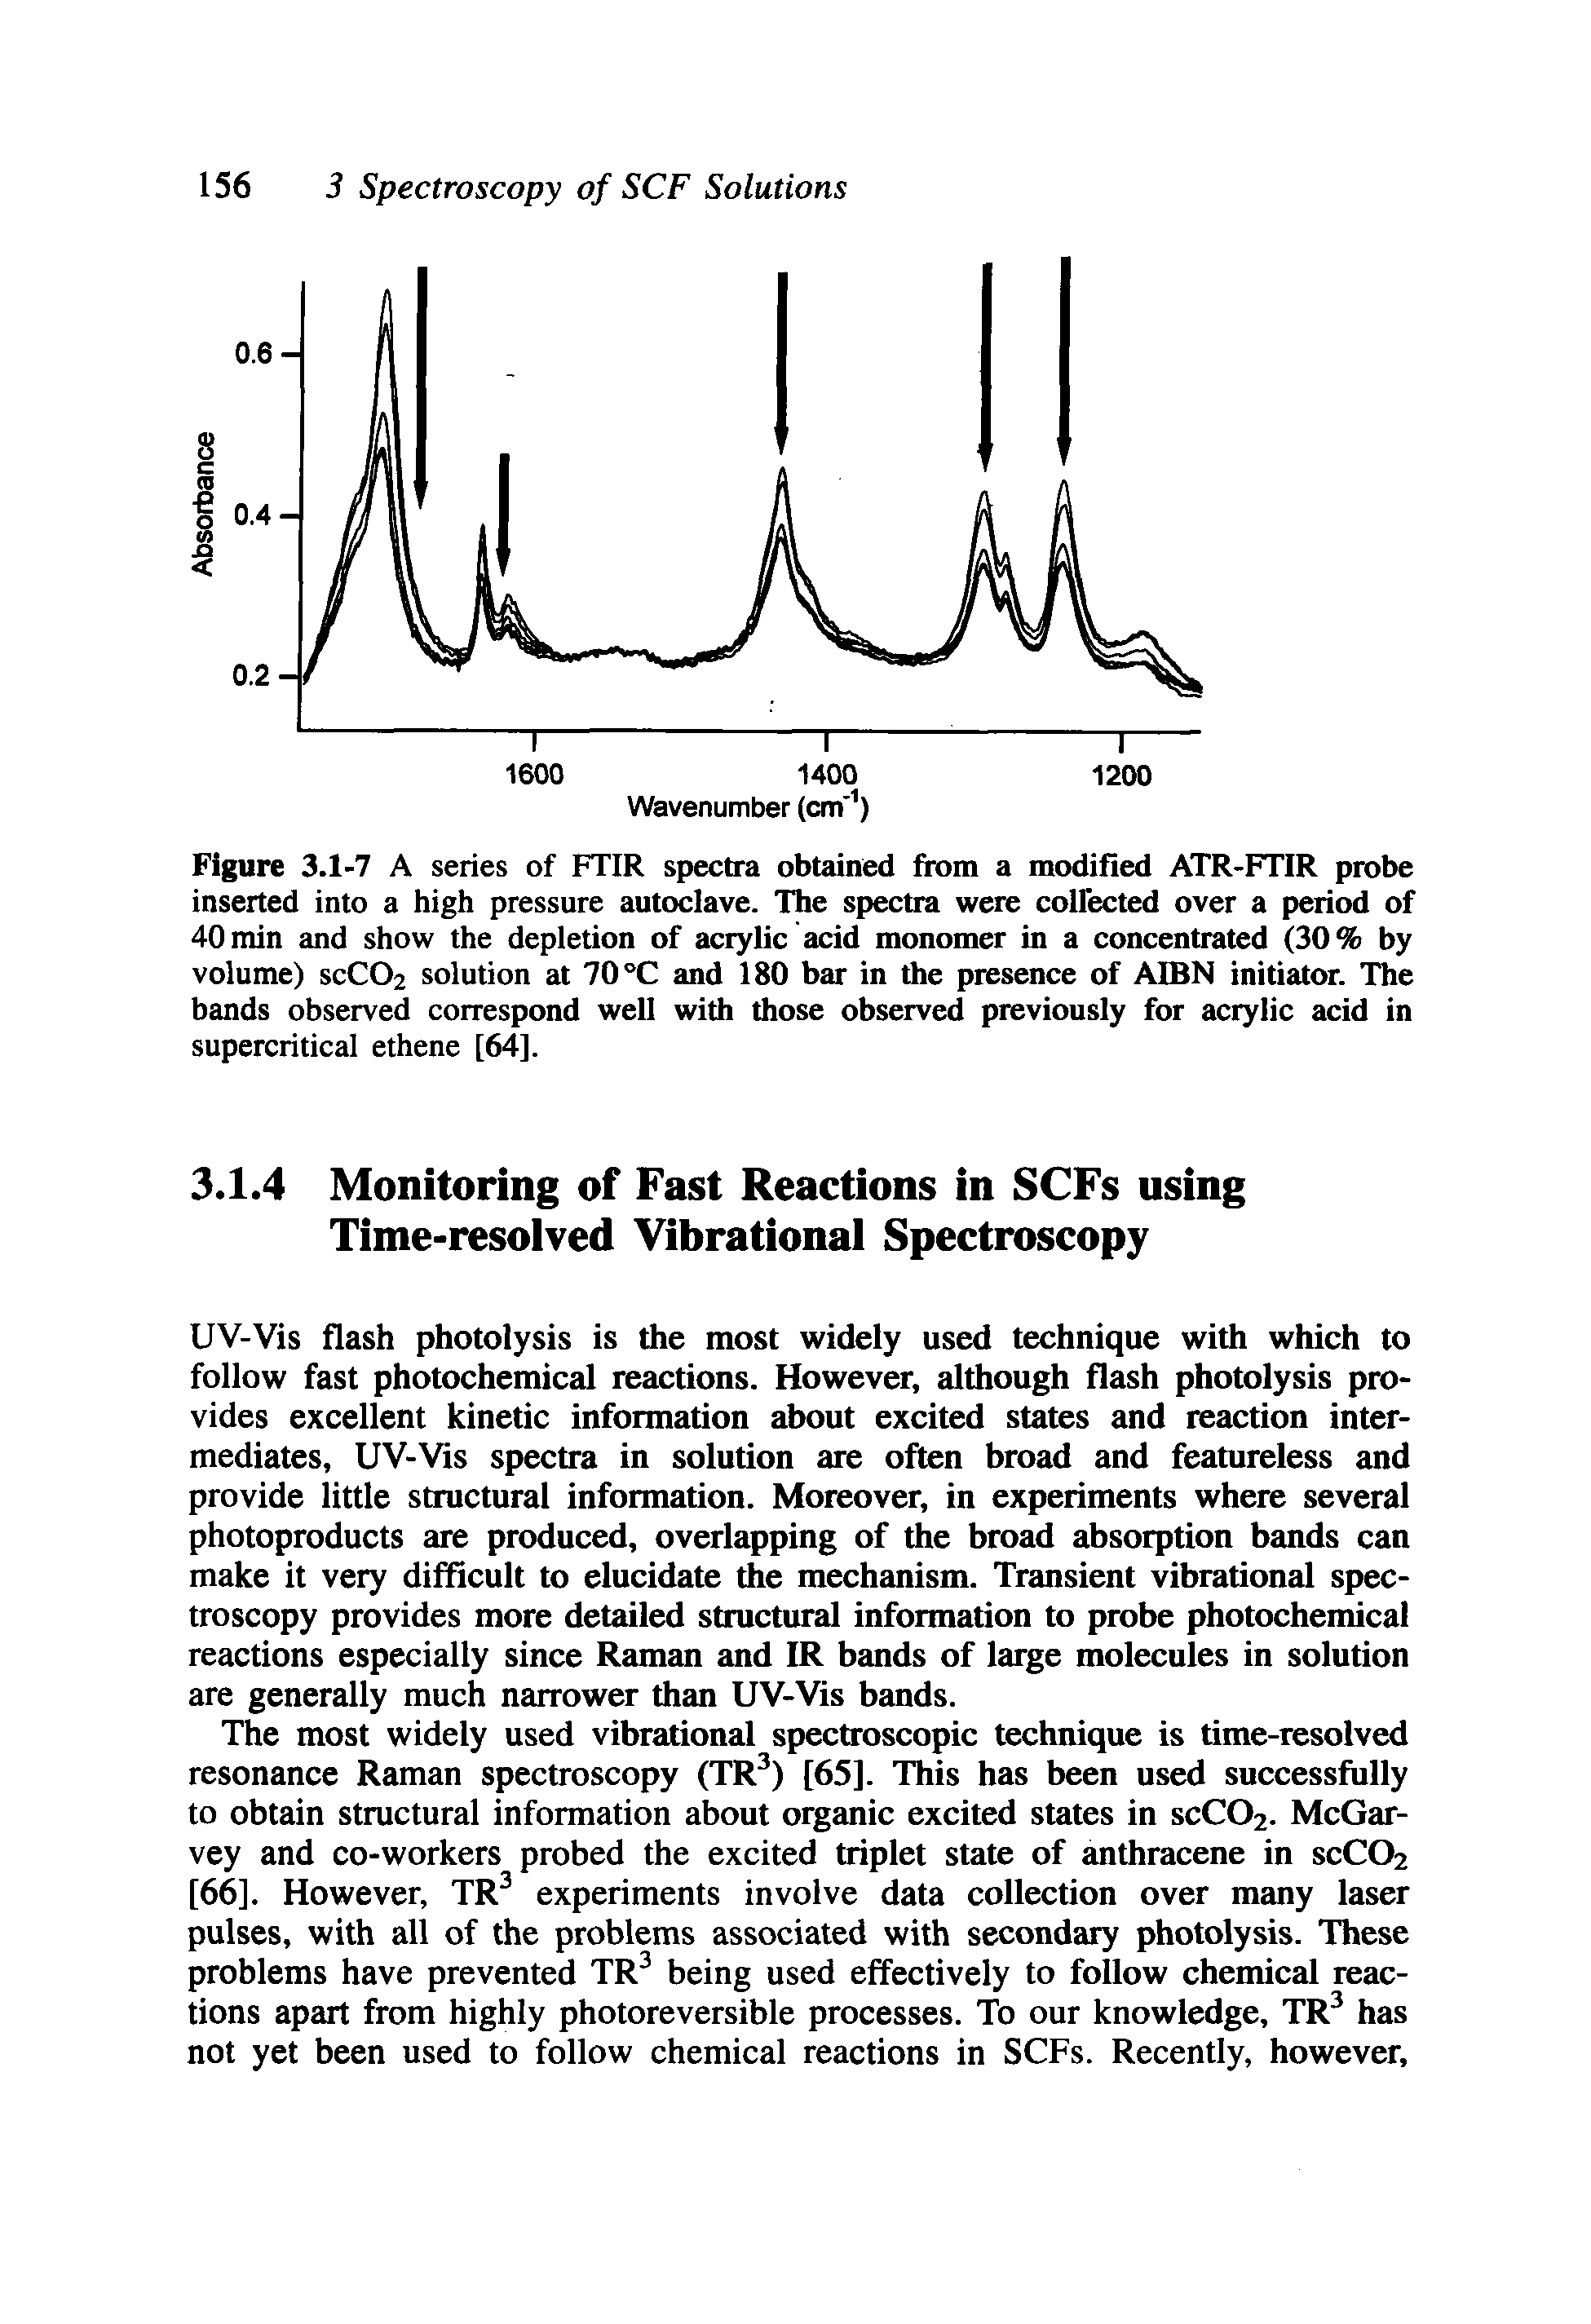 Figure 3.1-7 A series of FTIR spectra obtained from a modified ATR-FTIR probe inserted into a high pressure autoclave. The spectra were collected over a period of 40 min and show the depletion of acrylic acid monomer in a concentrated (30% by volume) SCCO2 solution at 70 °C and 180 bar in the presence of AIBN initiator. The bands observed correspond well with those observed previously for acrylic acid in supercritical ethene [64].